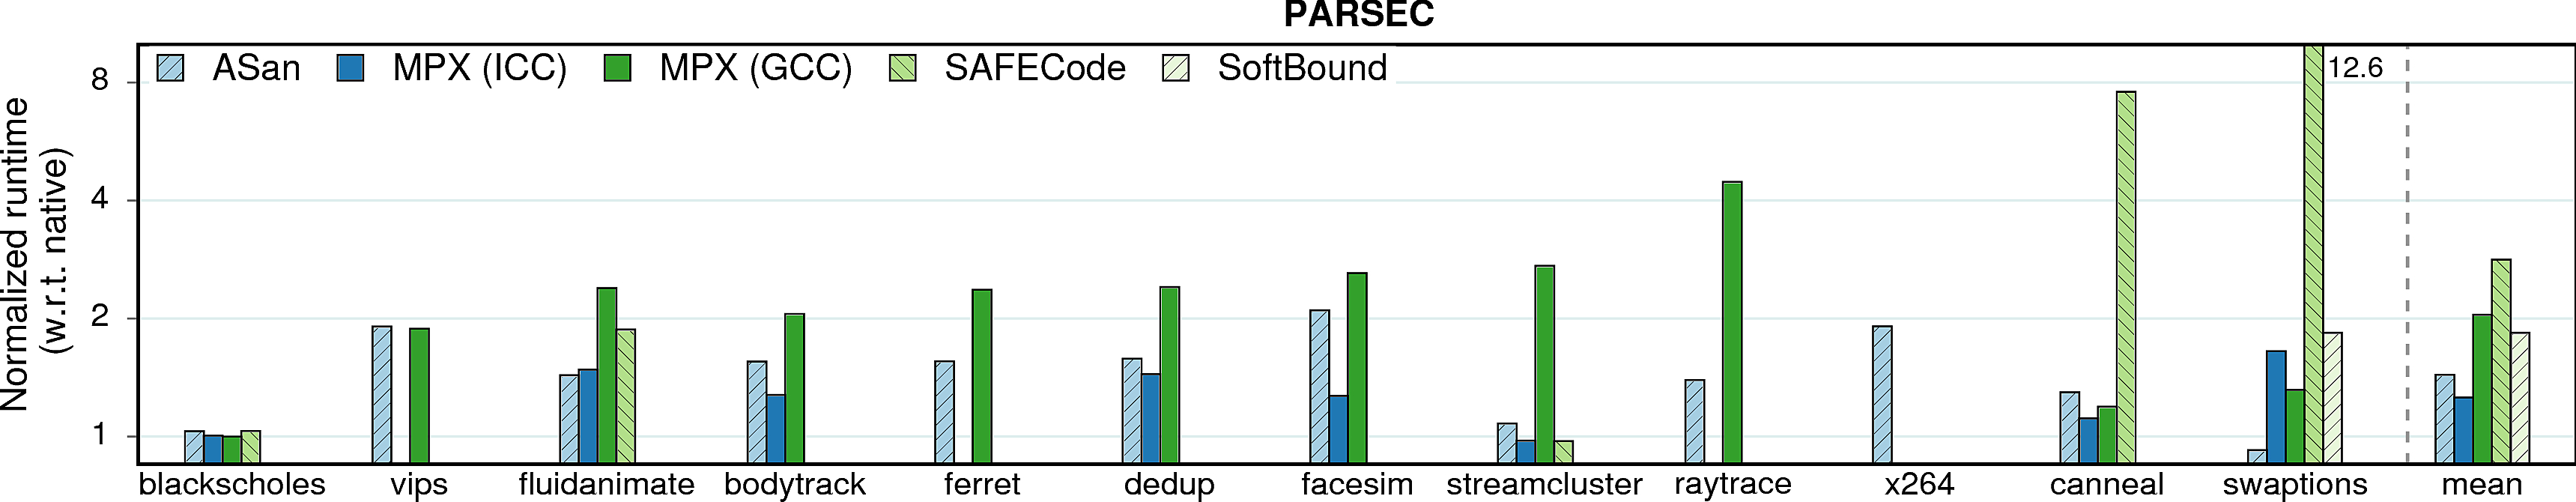 Performance overheads of PARSEC